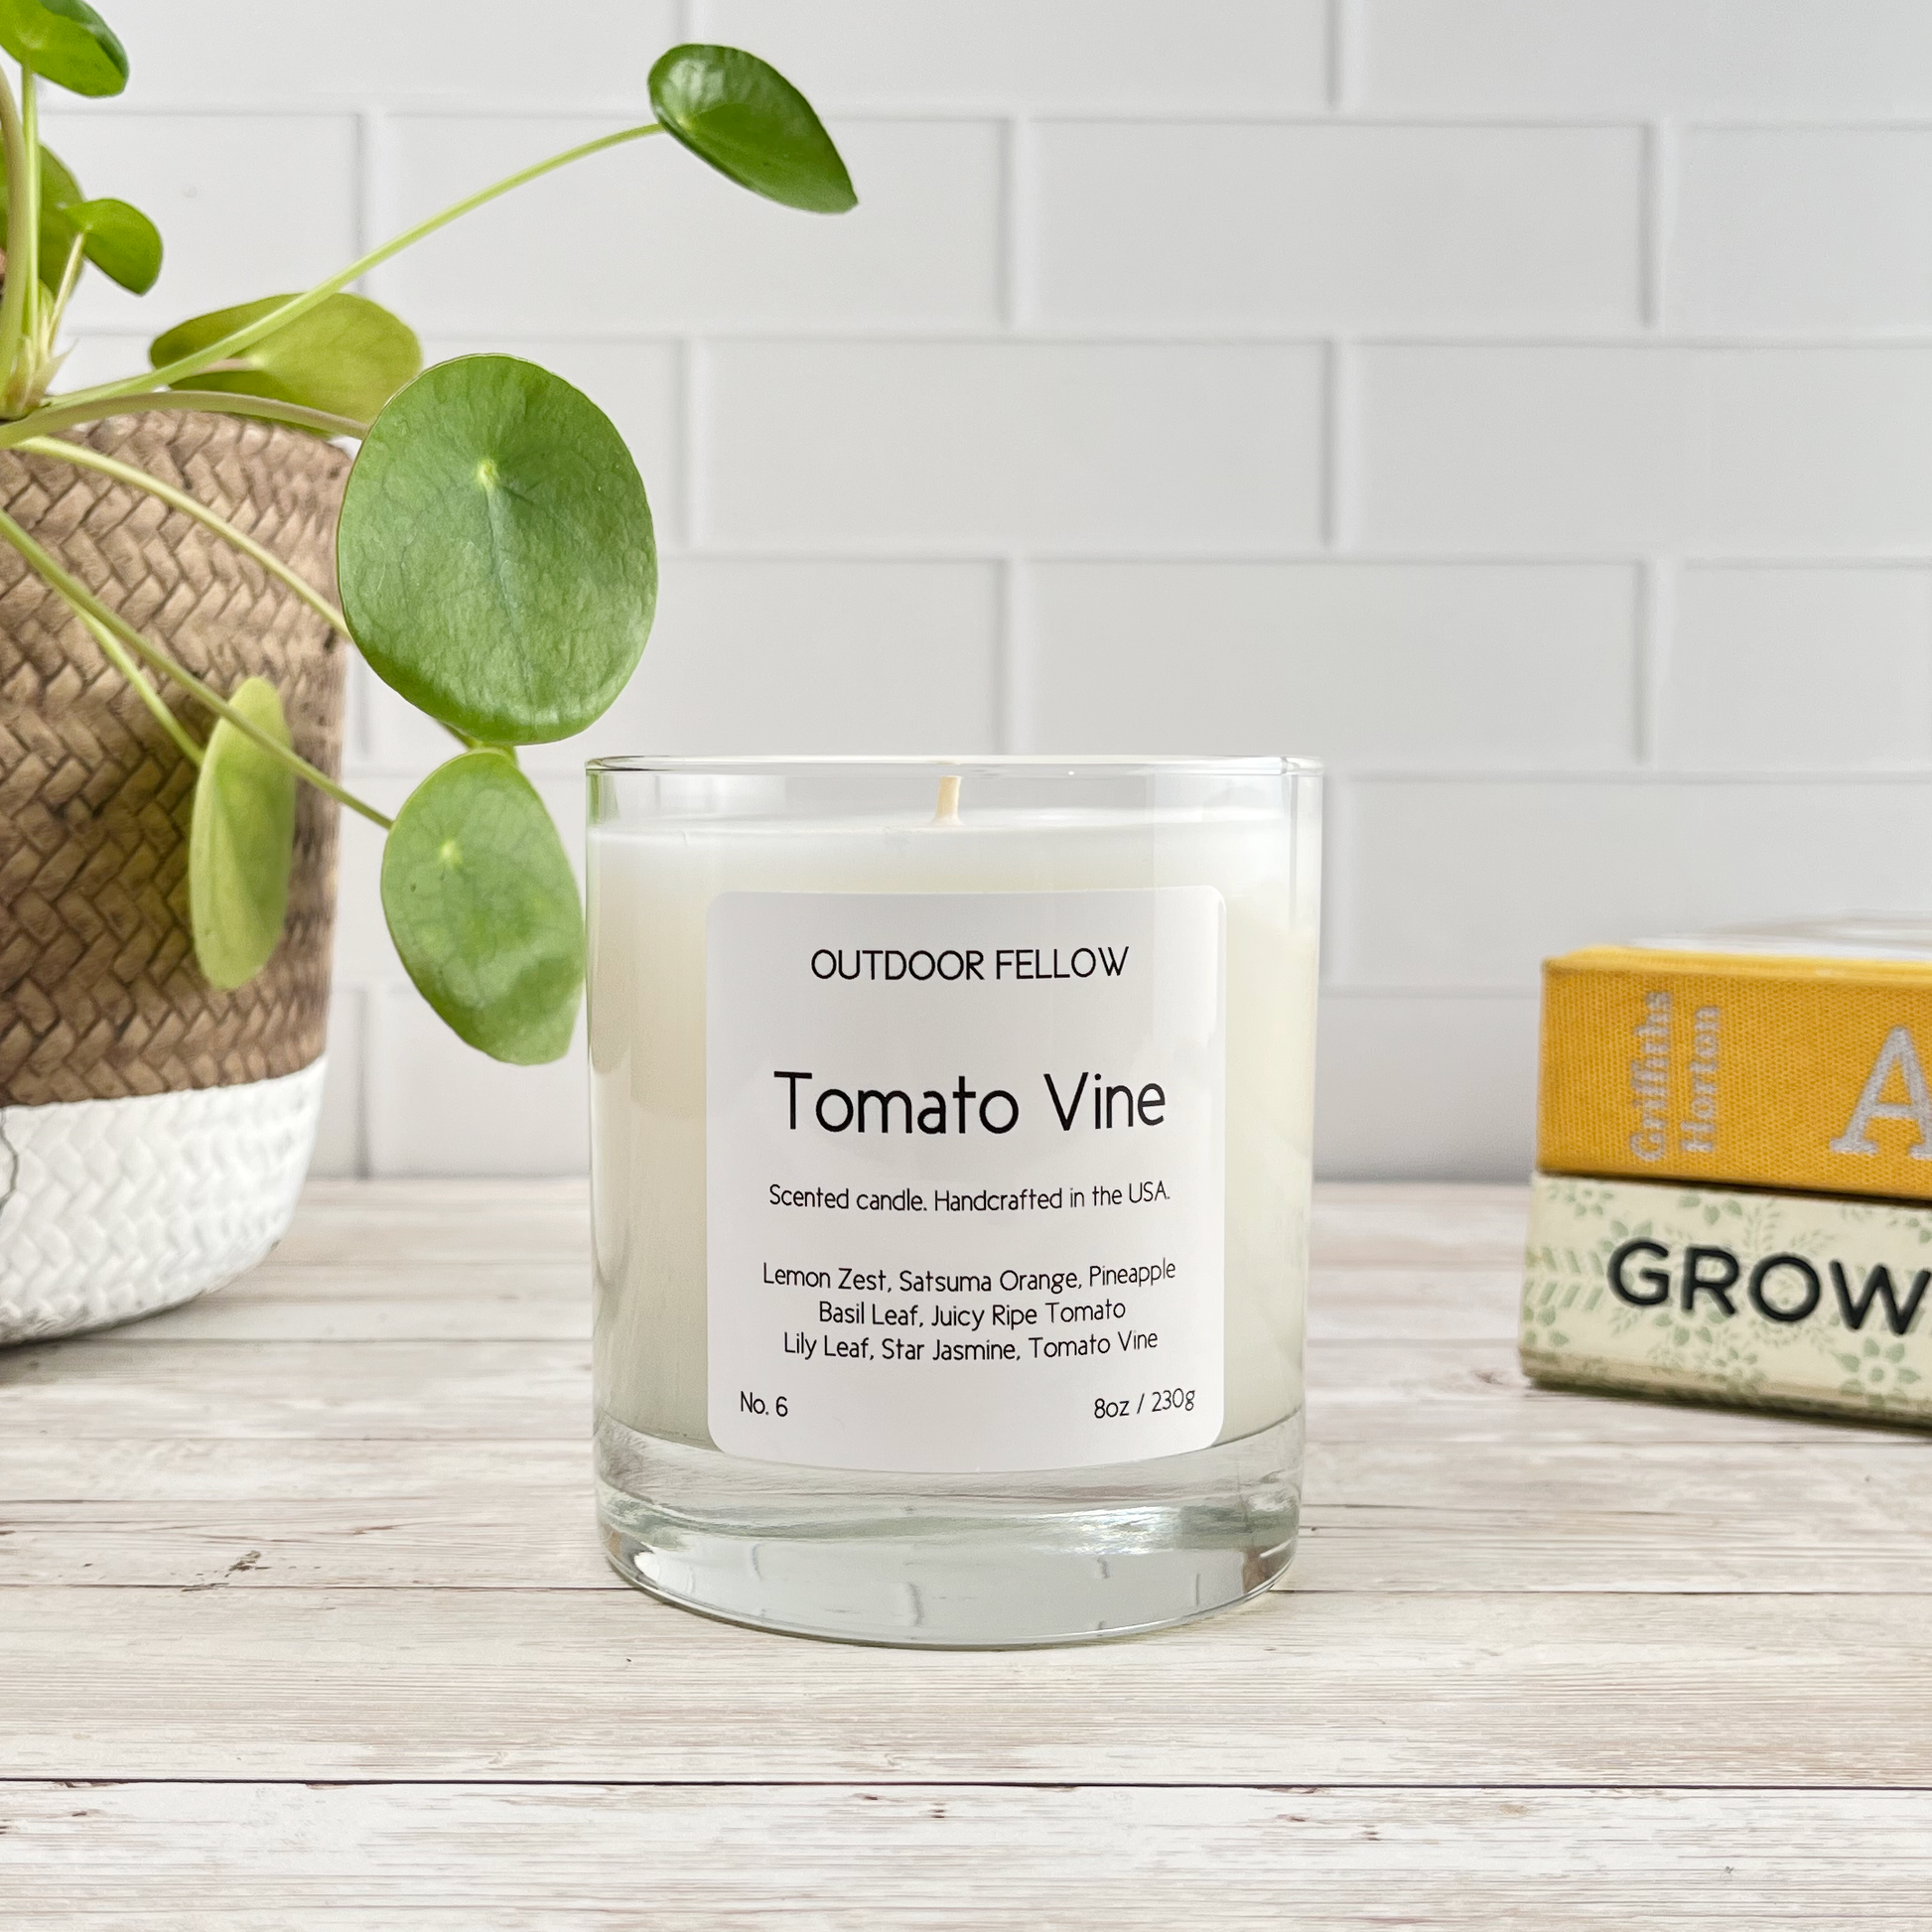 Tomato Vine scented candle on a wood surface in front of a plant and books